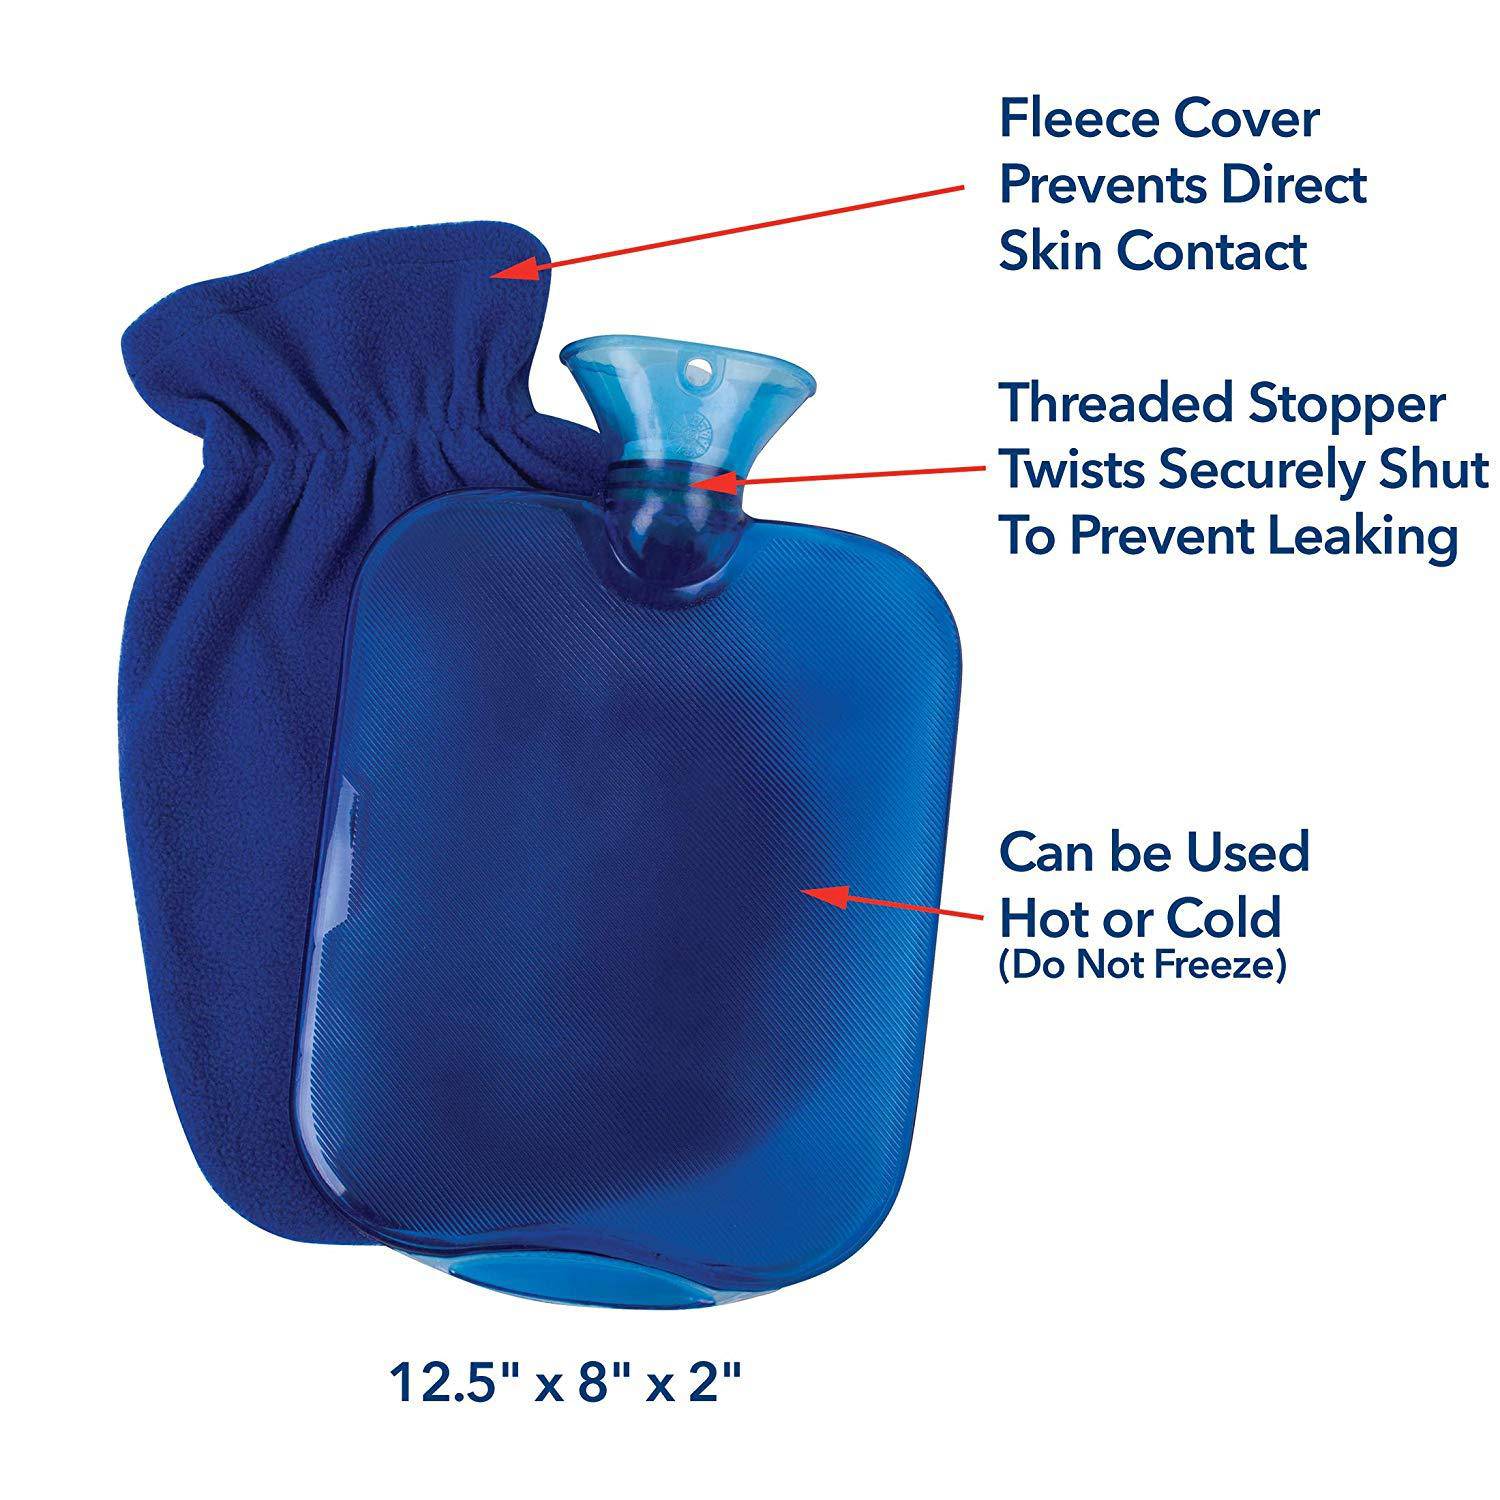 Carex Hot Water Bottle with Fleece Cover - For Hot or Cold Treatment